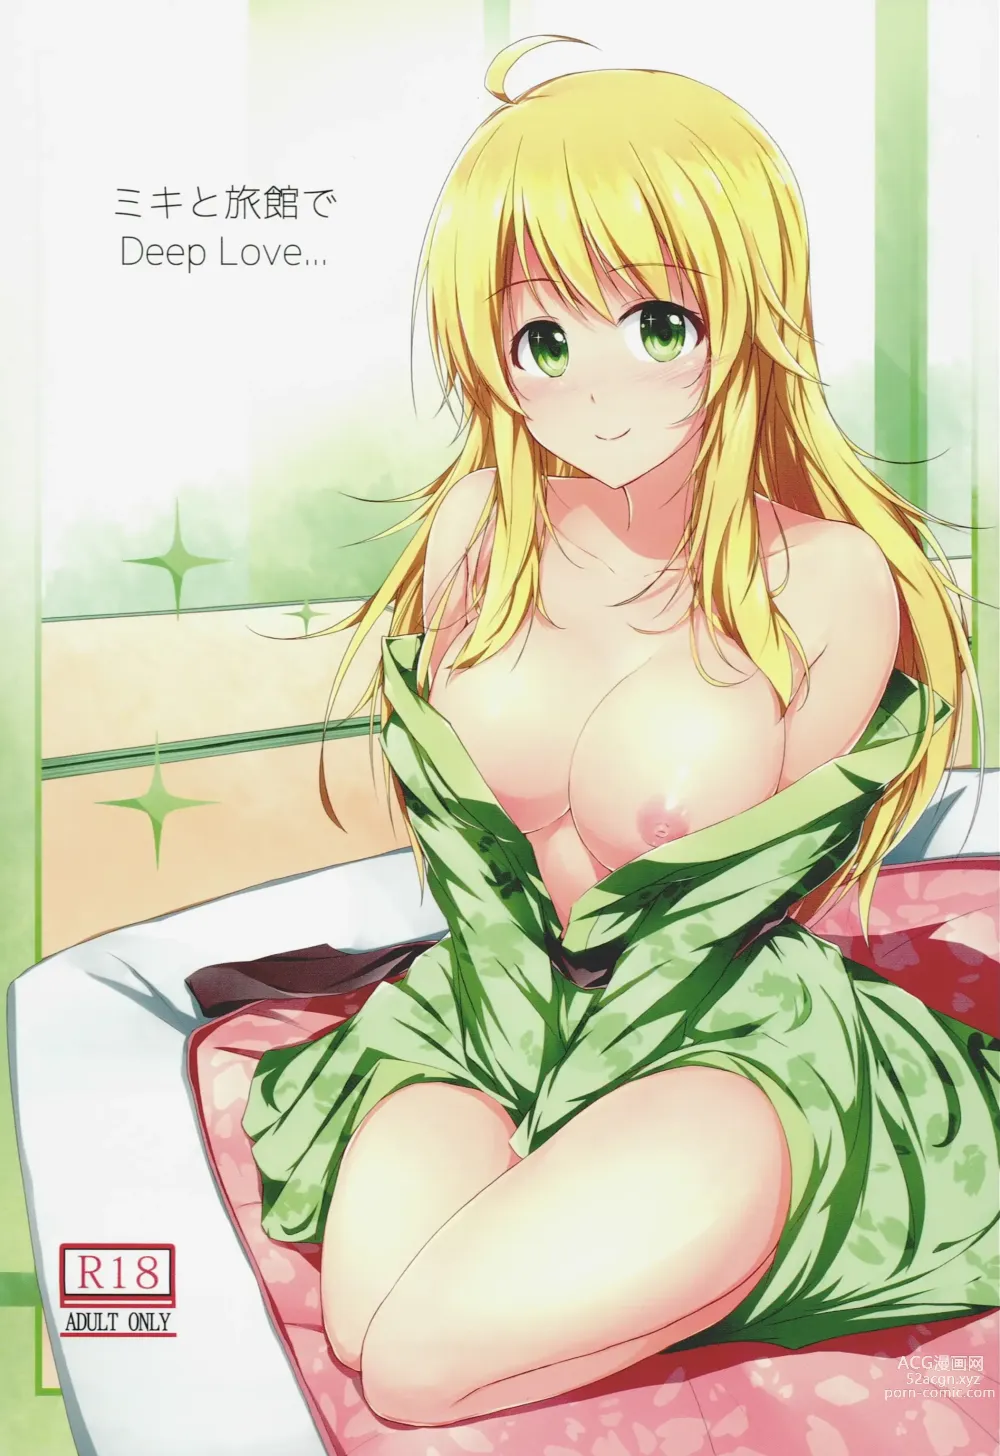 Page 1 of doujinshi Miki to Honey no DeepLove